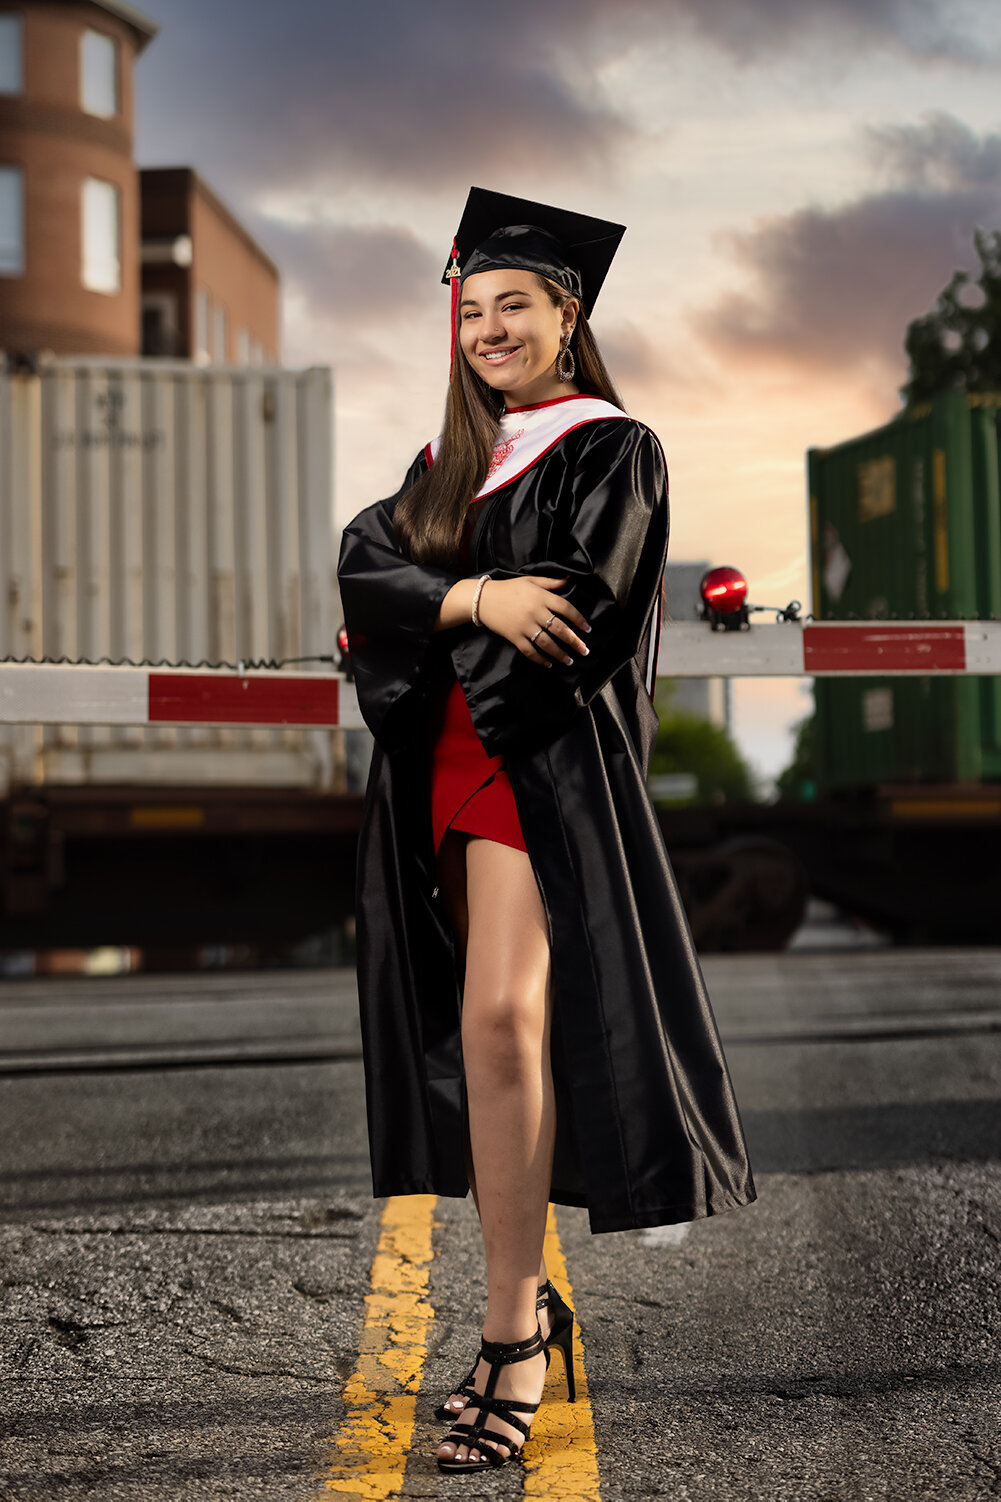 high school senior poses in her graduation cap and gown in front of train tracks and active train for Don Evans Photography in Greensboro NC.jpg